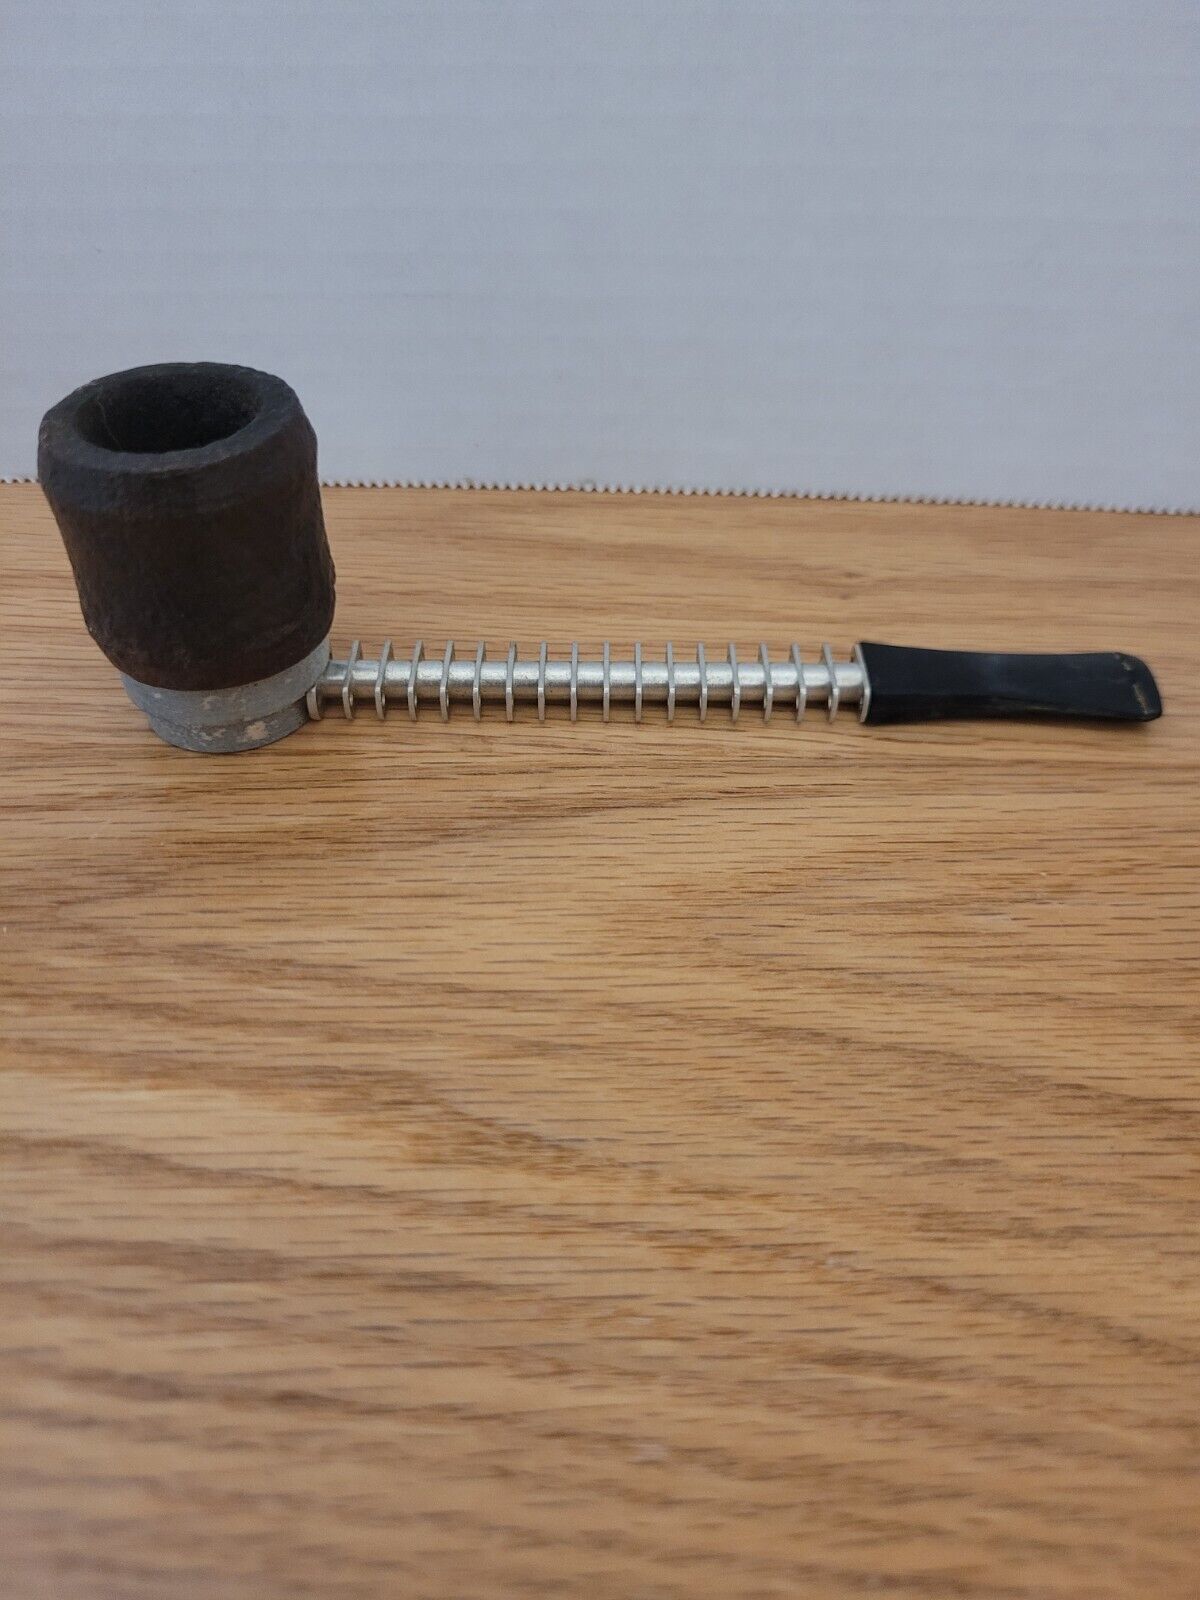 VINTAGE FEATHERWEIGHT AIROGRATE BY YELLO-BOLE SMOKING PIPE 